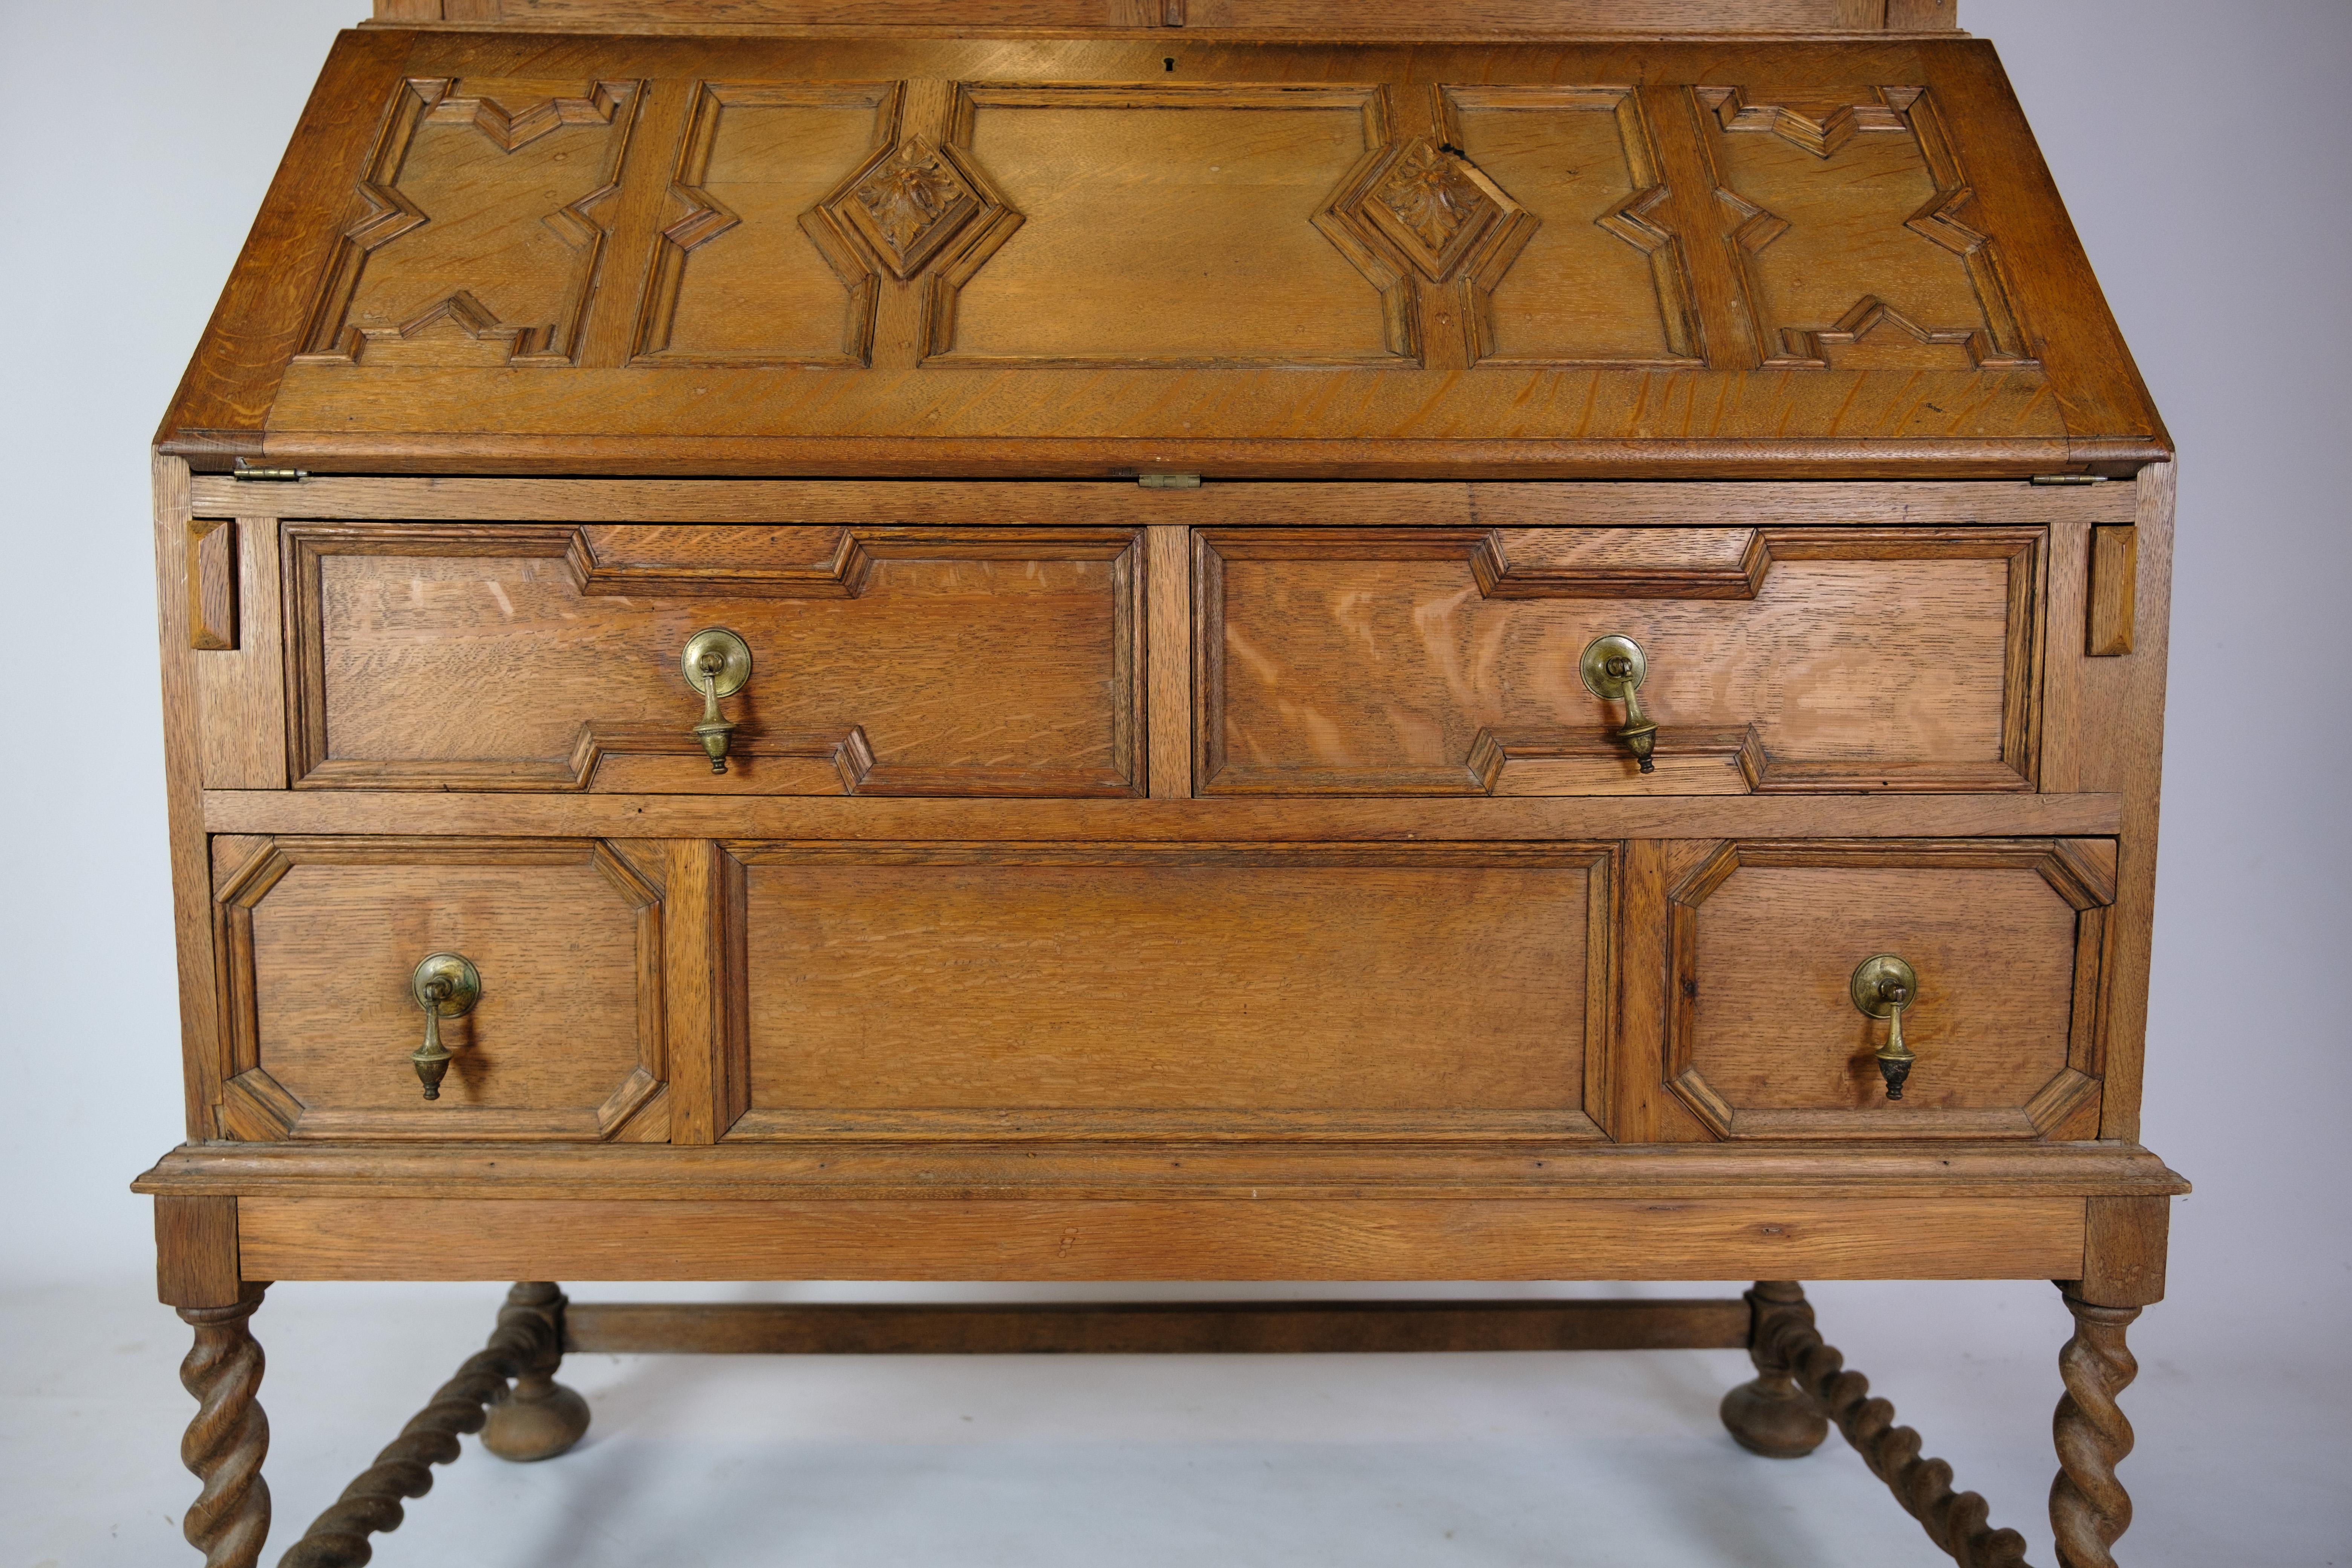 Chatol with Upper cabinet in Oak with Wood Carvings from England, 1890 For Sale 6